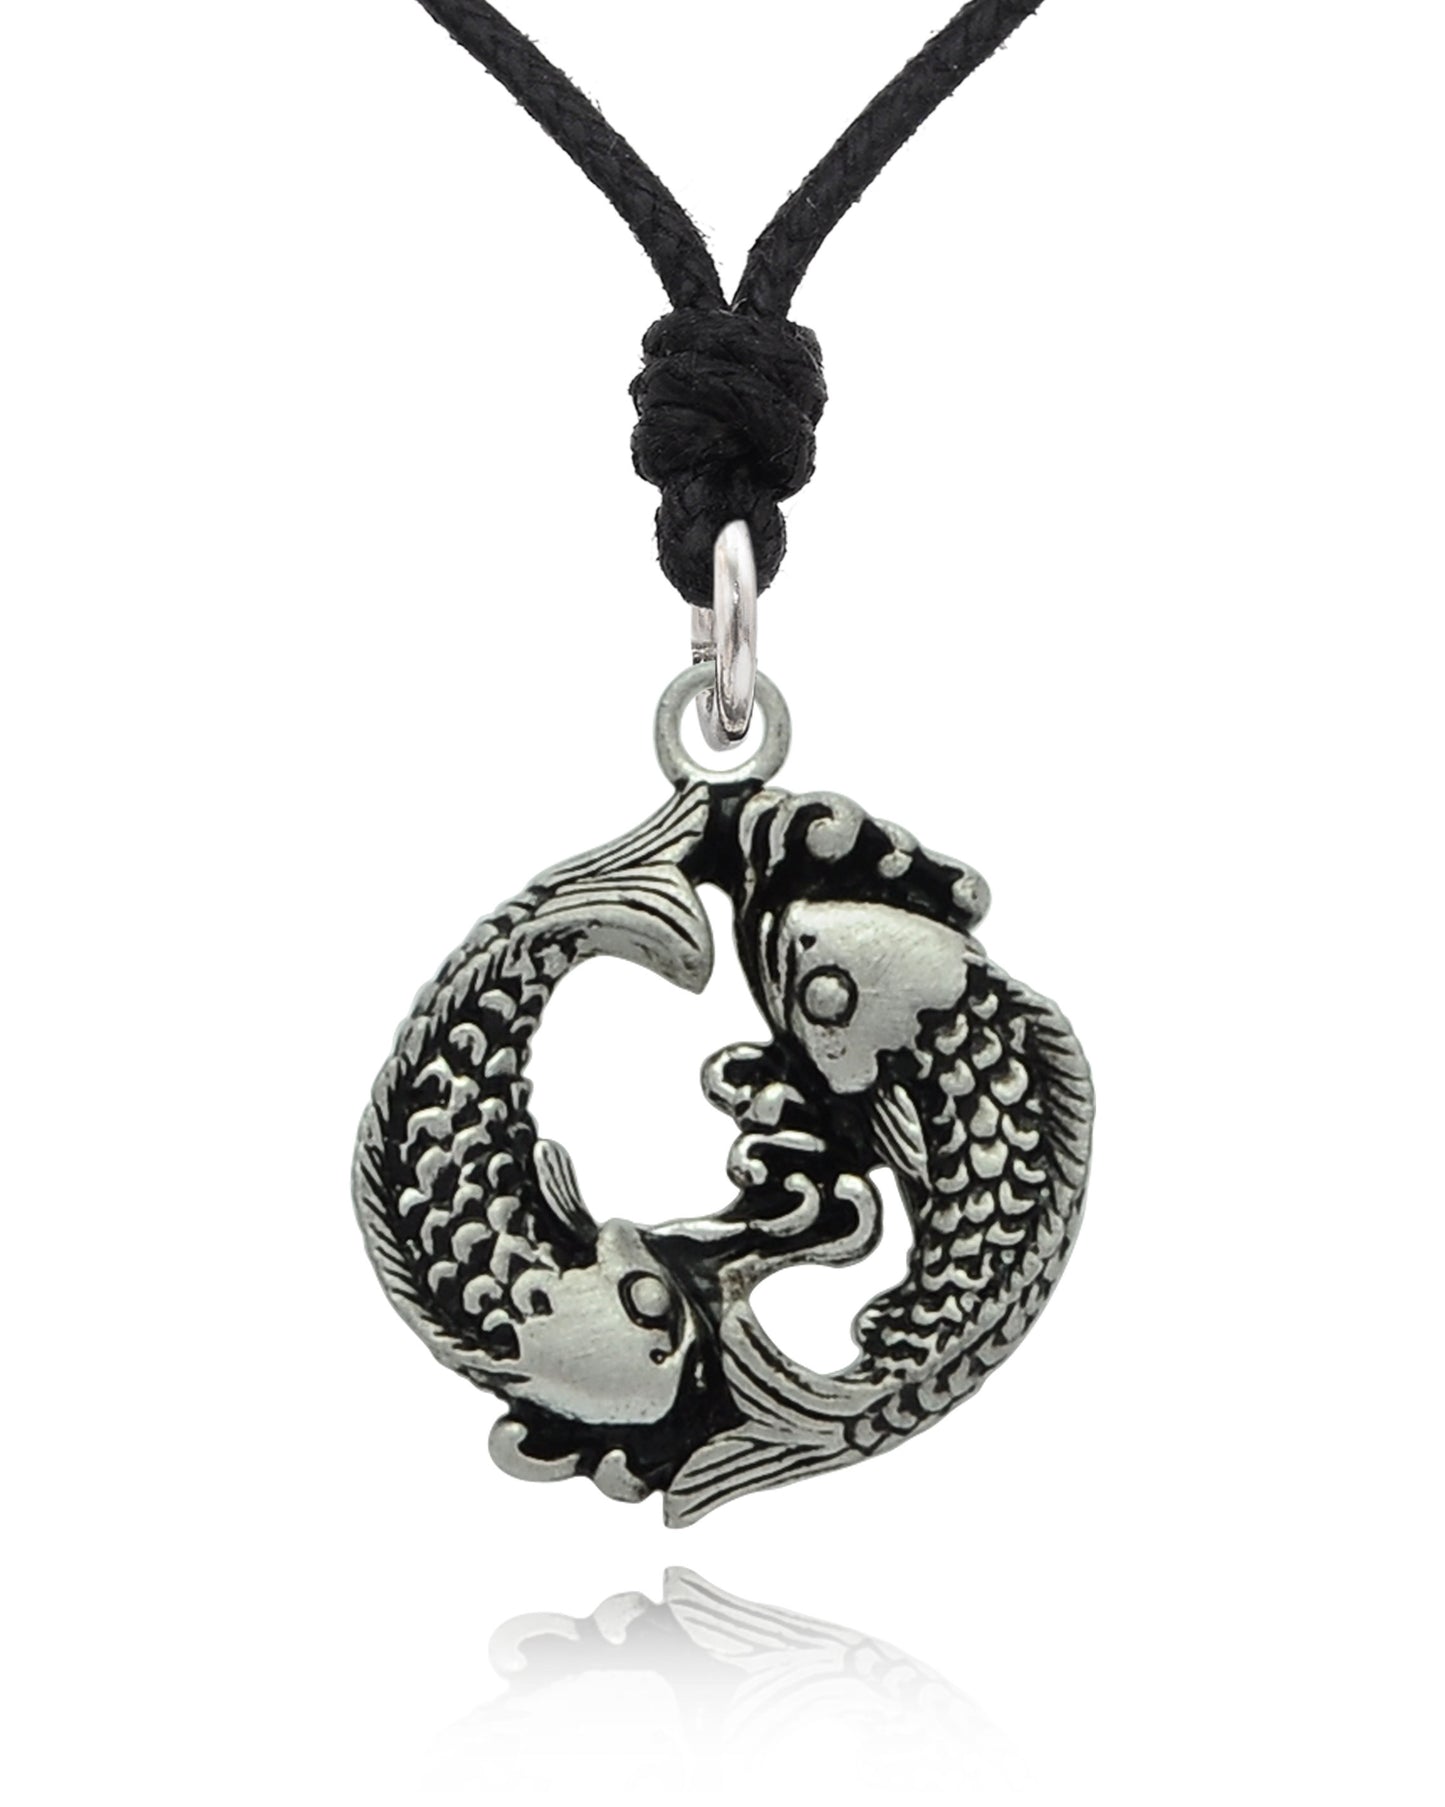 Pisces Fish Yin Yang Astrology Silver Pewter Charm Necklace Pendant Jewelry With Cotton Cord